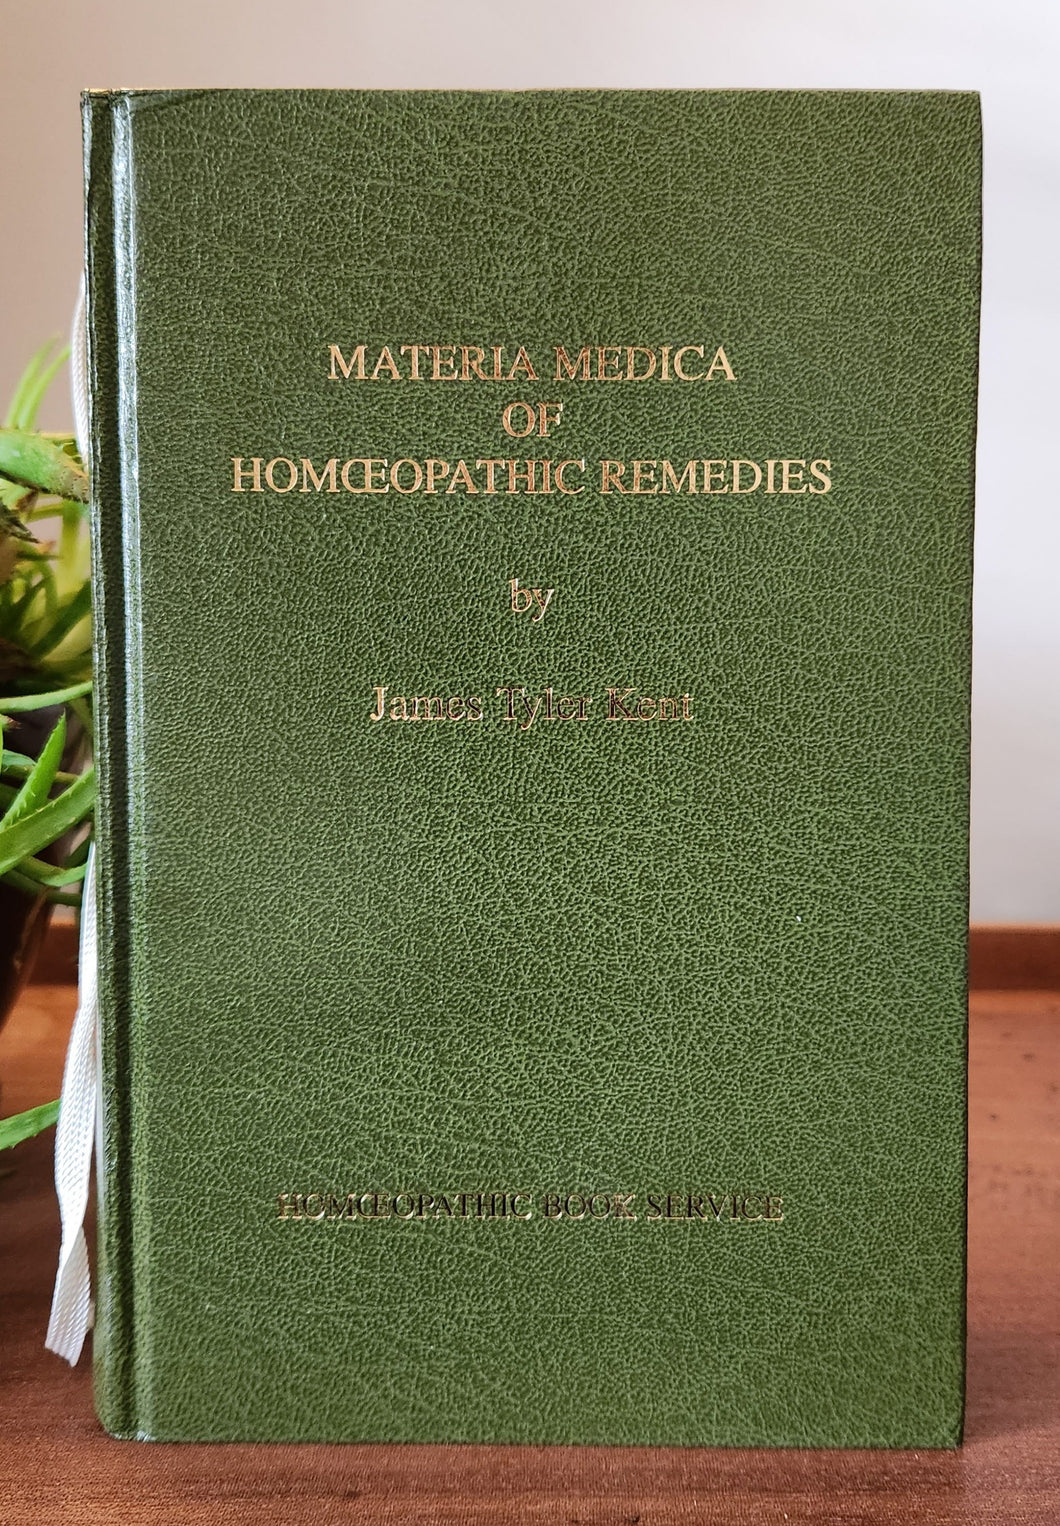 Materia Medica of Homeopathic Remedies by James Tyler Kent